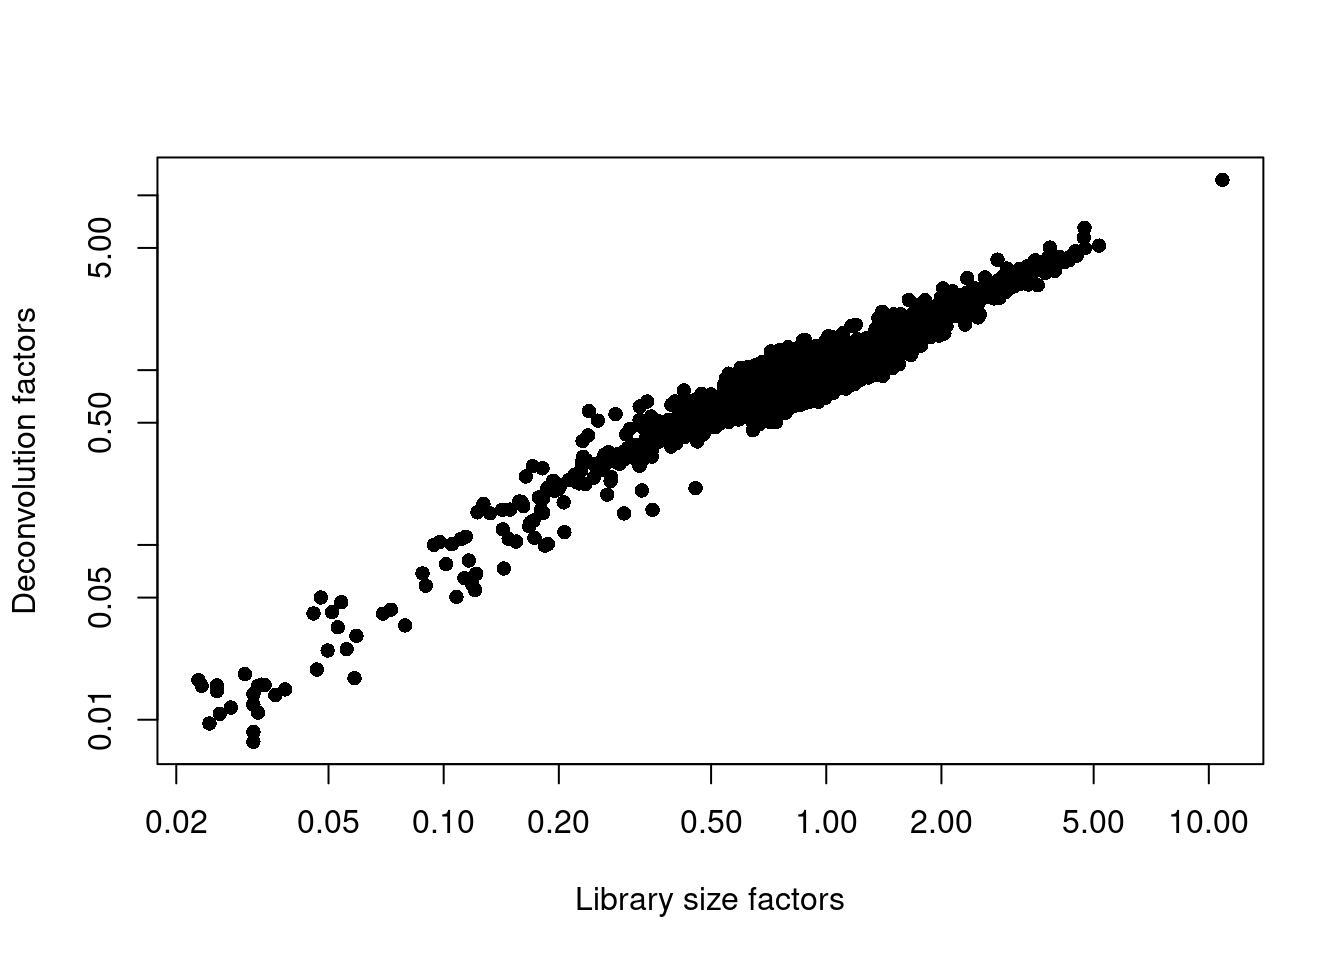 Relationship between the library size factors and the deconvolution size factors in the PBMC dataset.